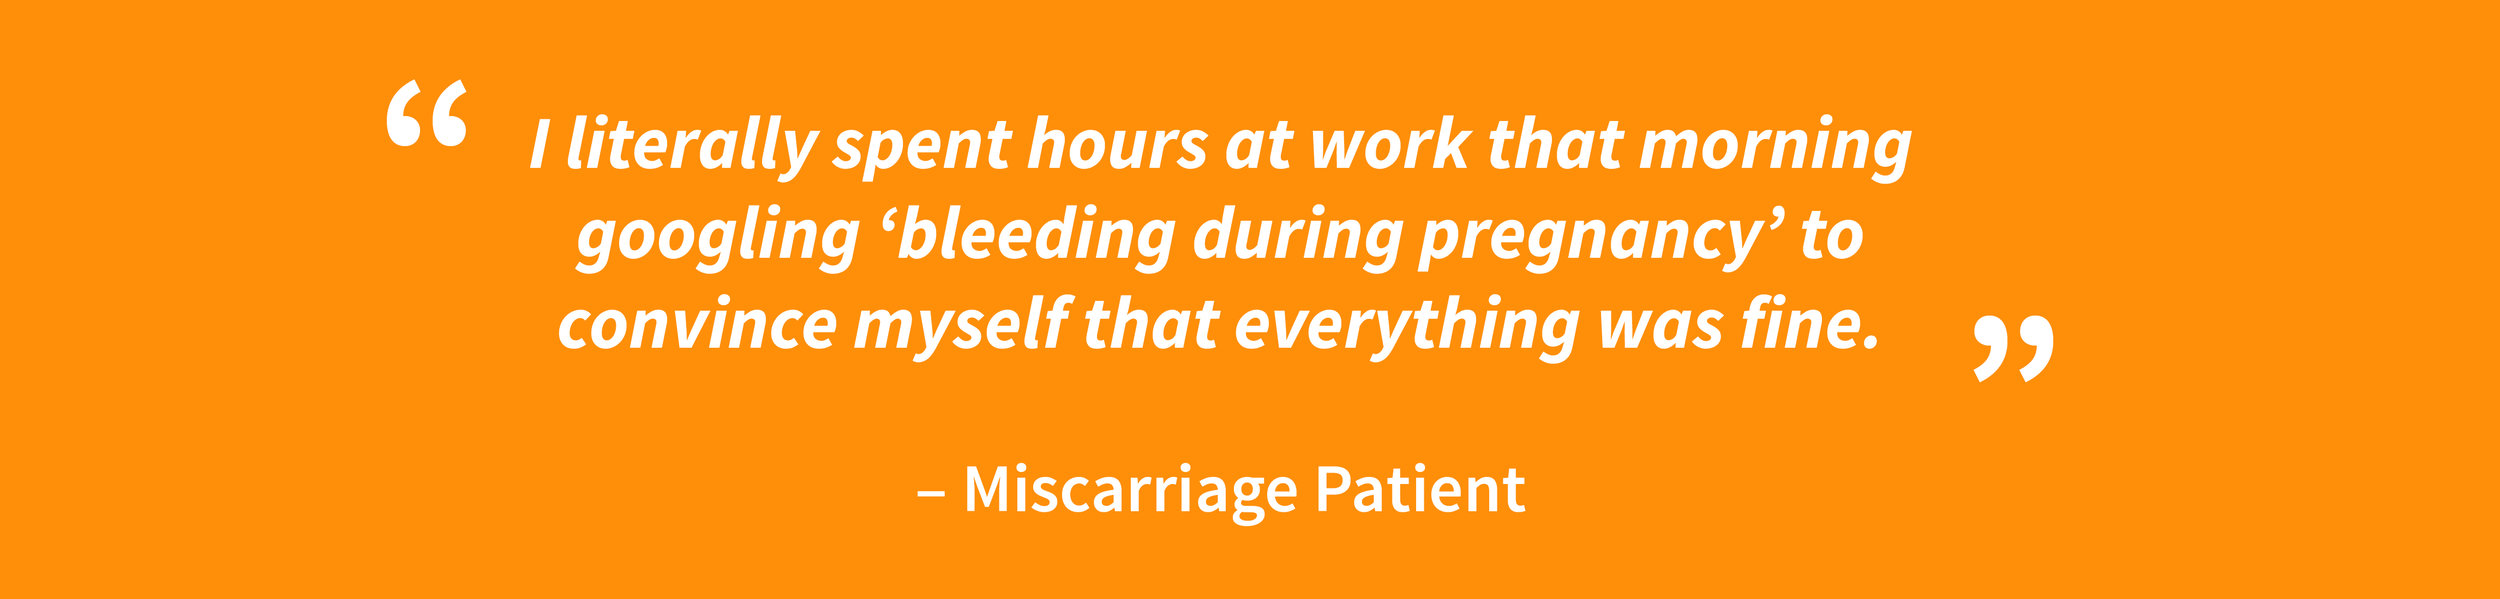 Miscarriage Project Export 4.jpg